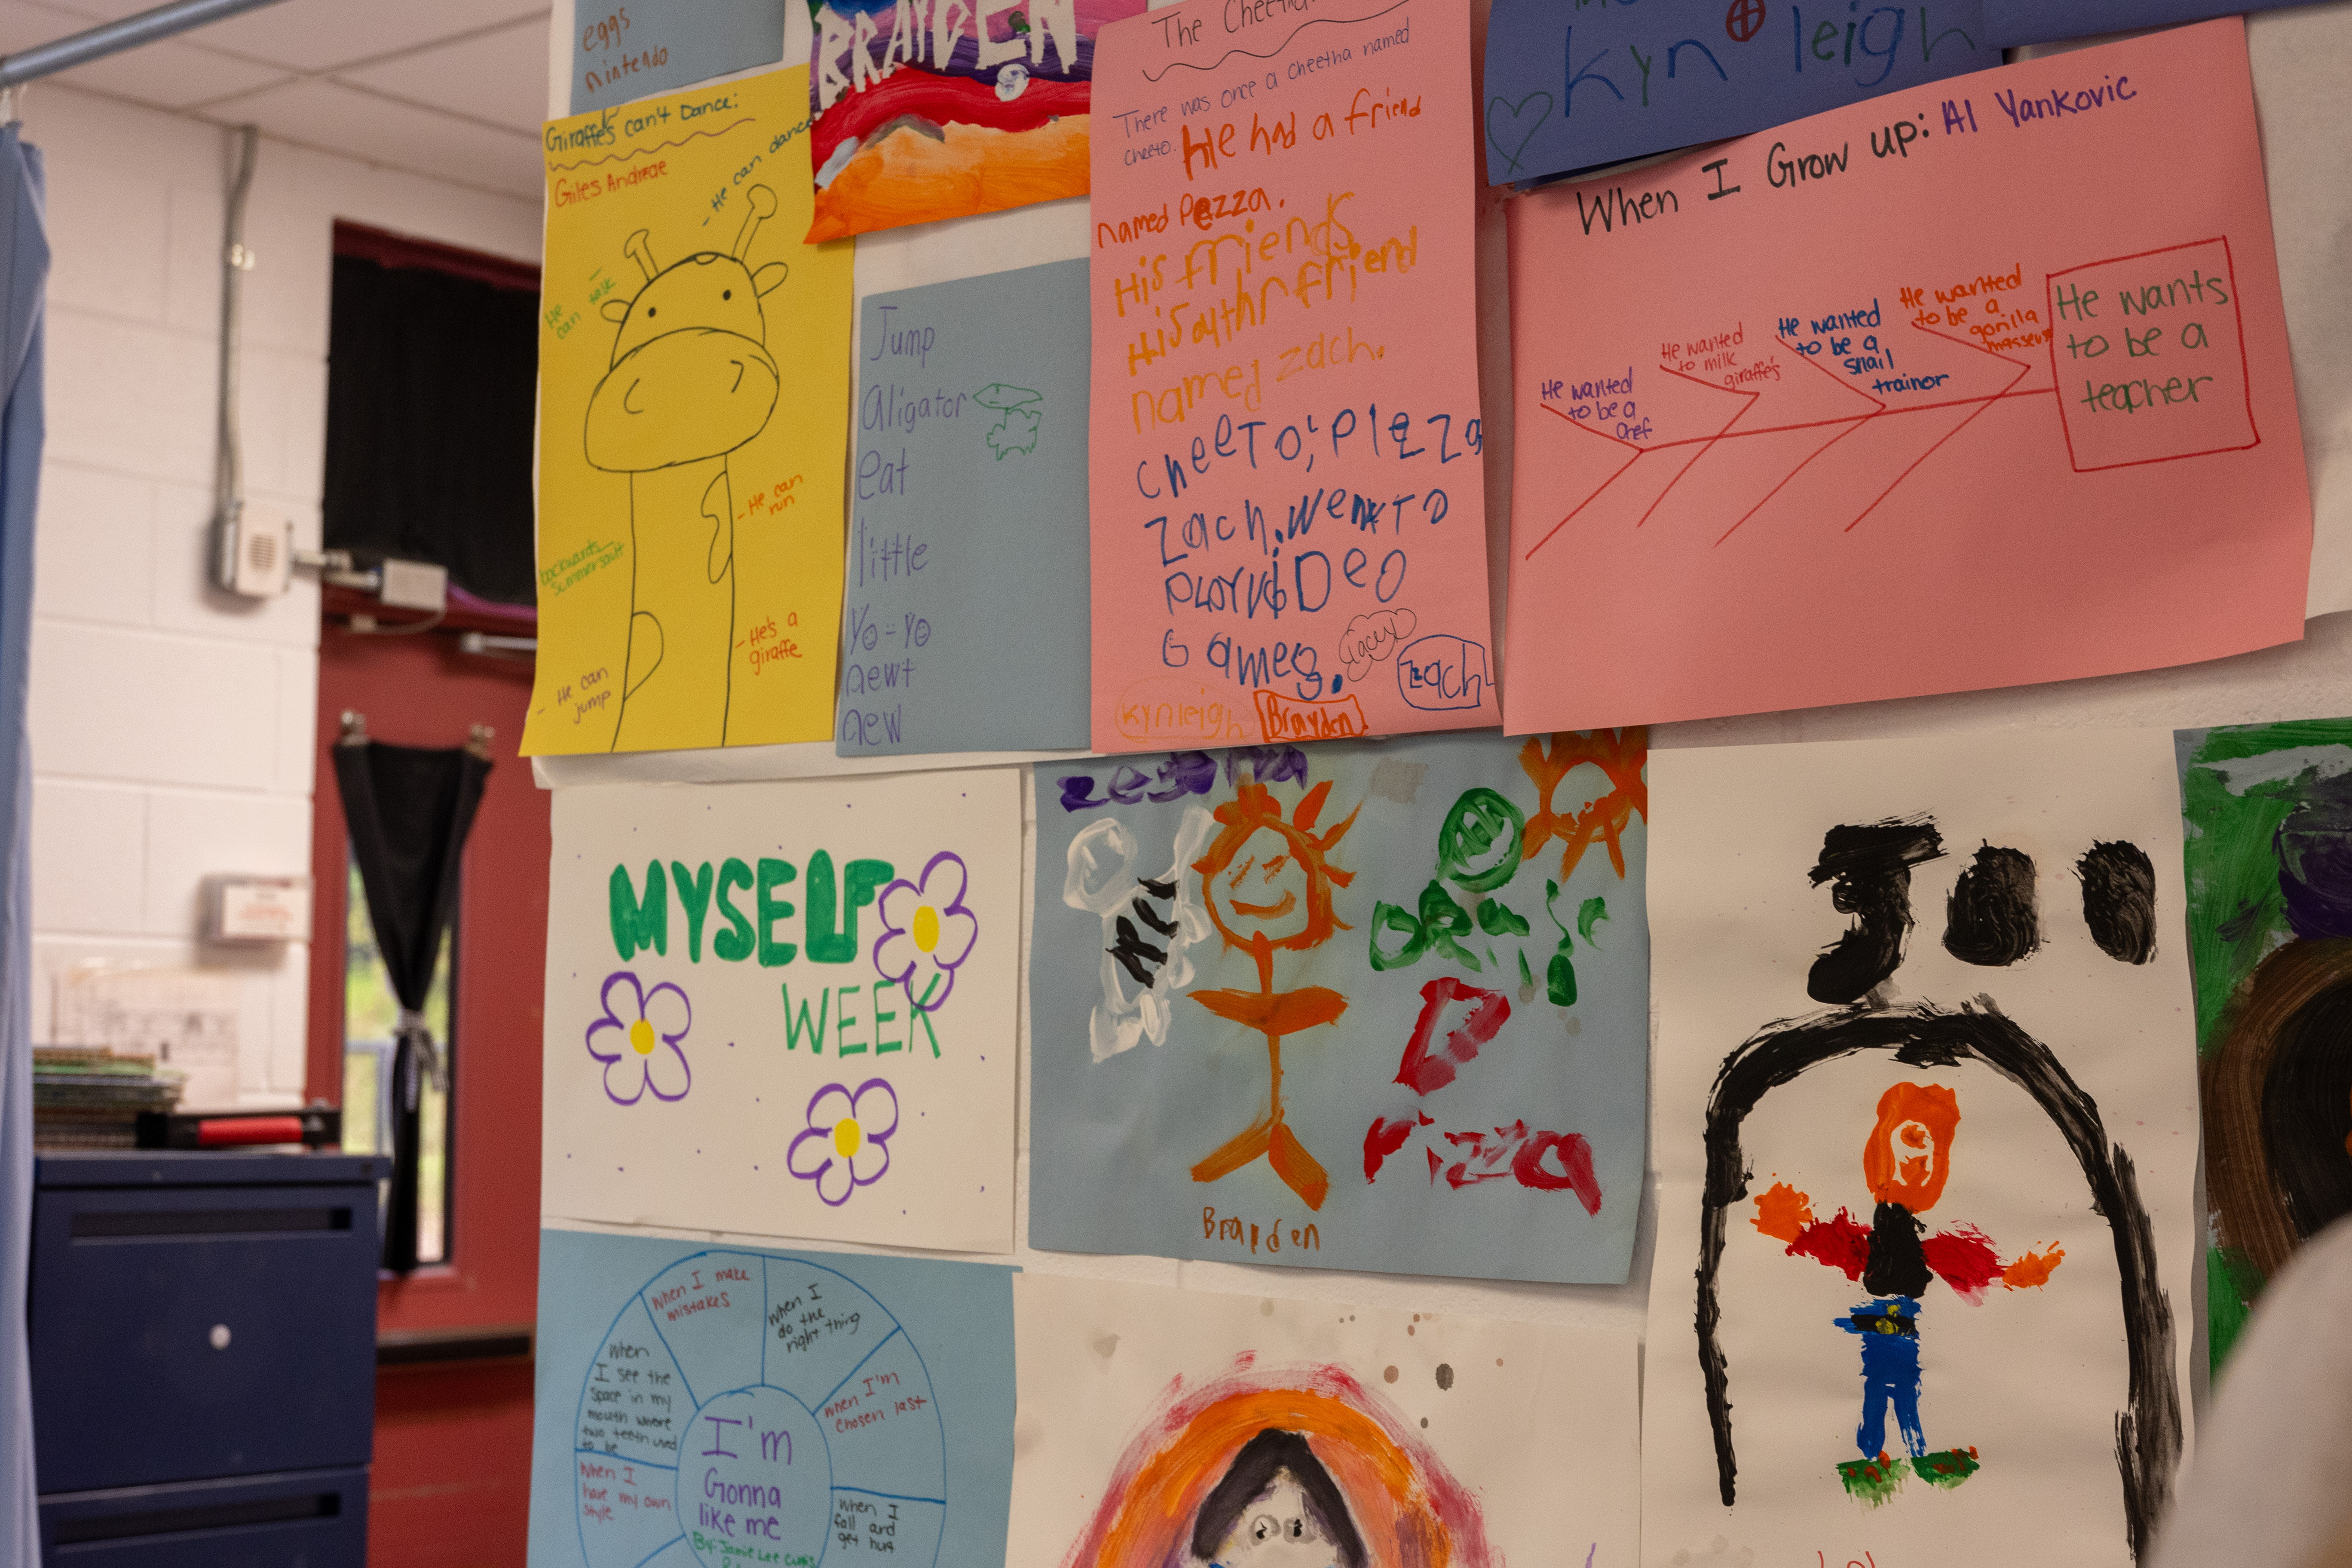 Many drawings done by young children around a sign that reads "Myself Week" at an Energy Express camp.